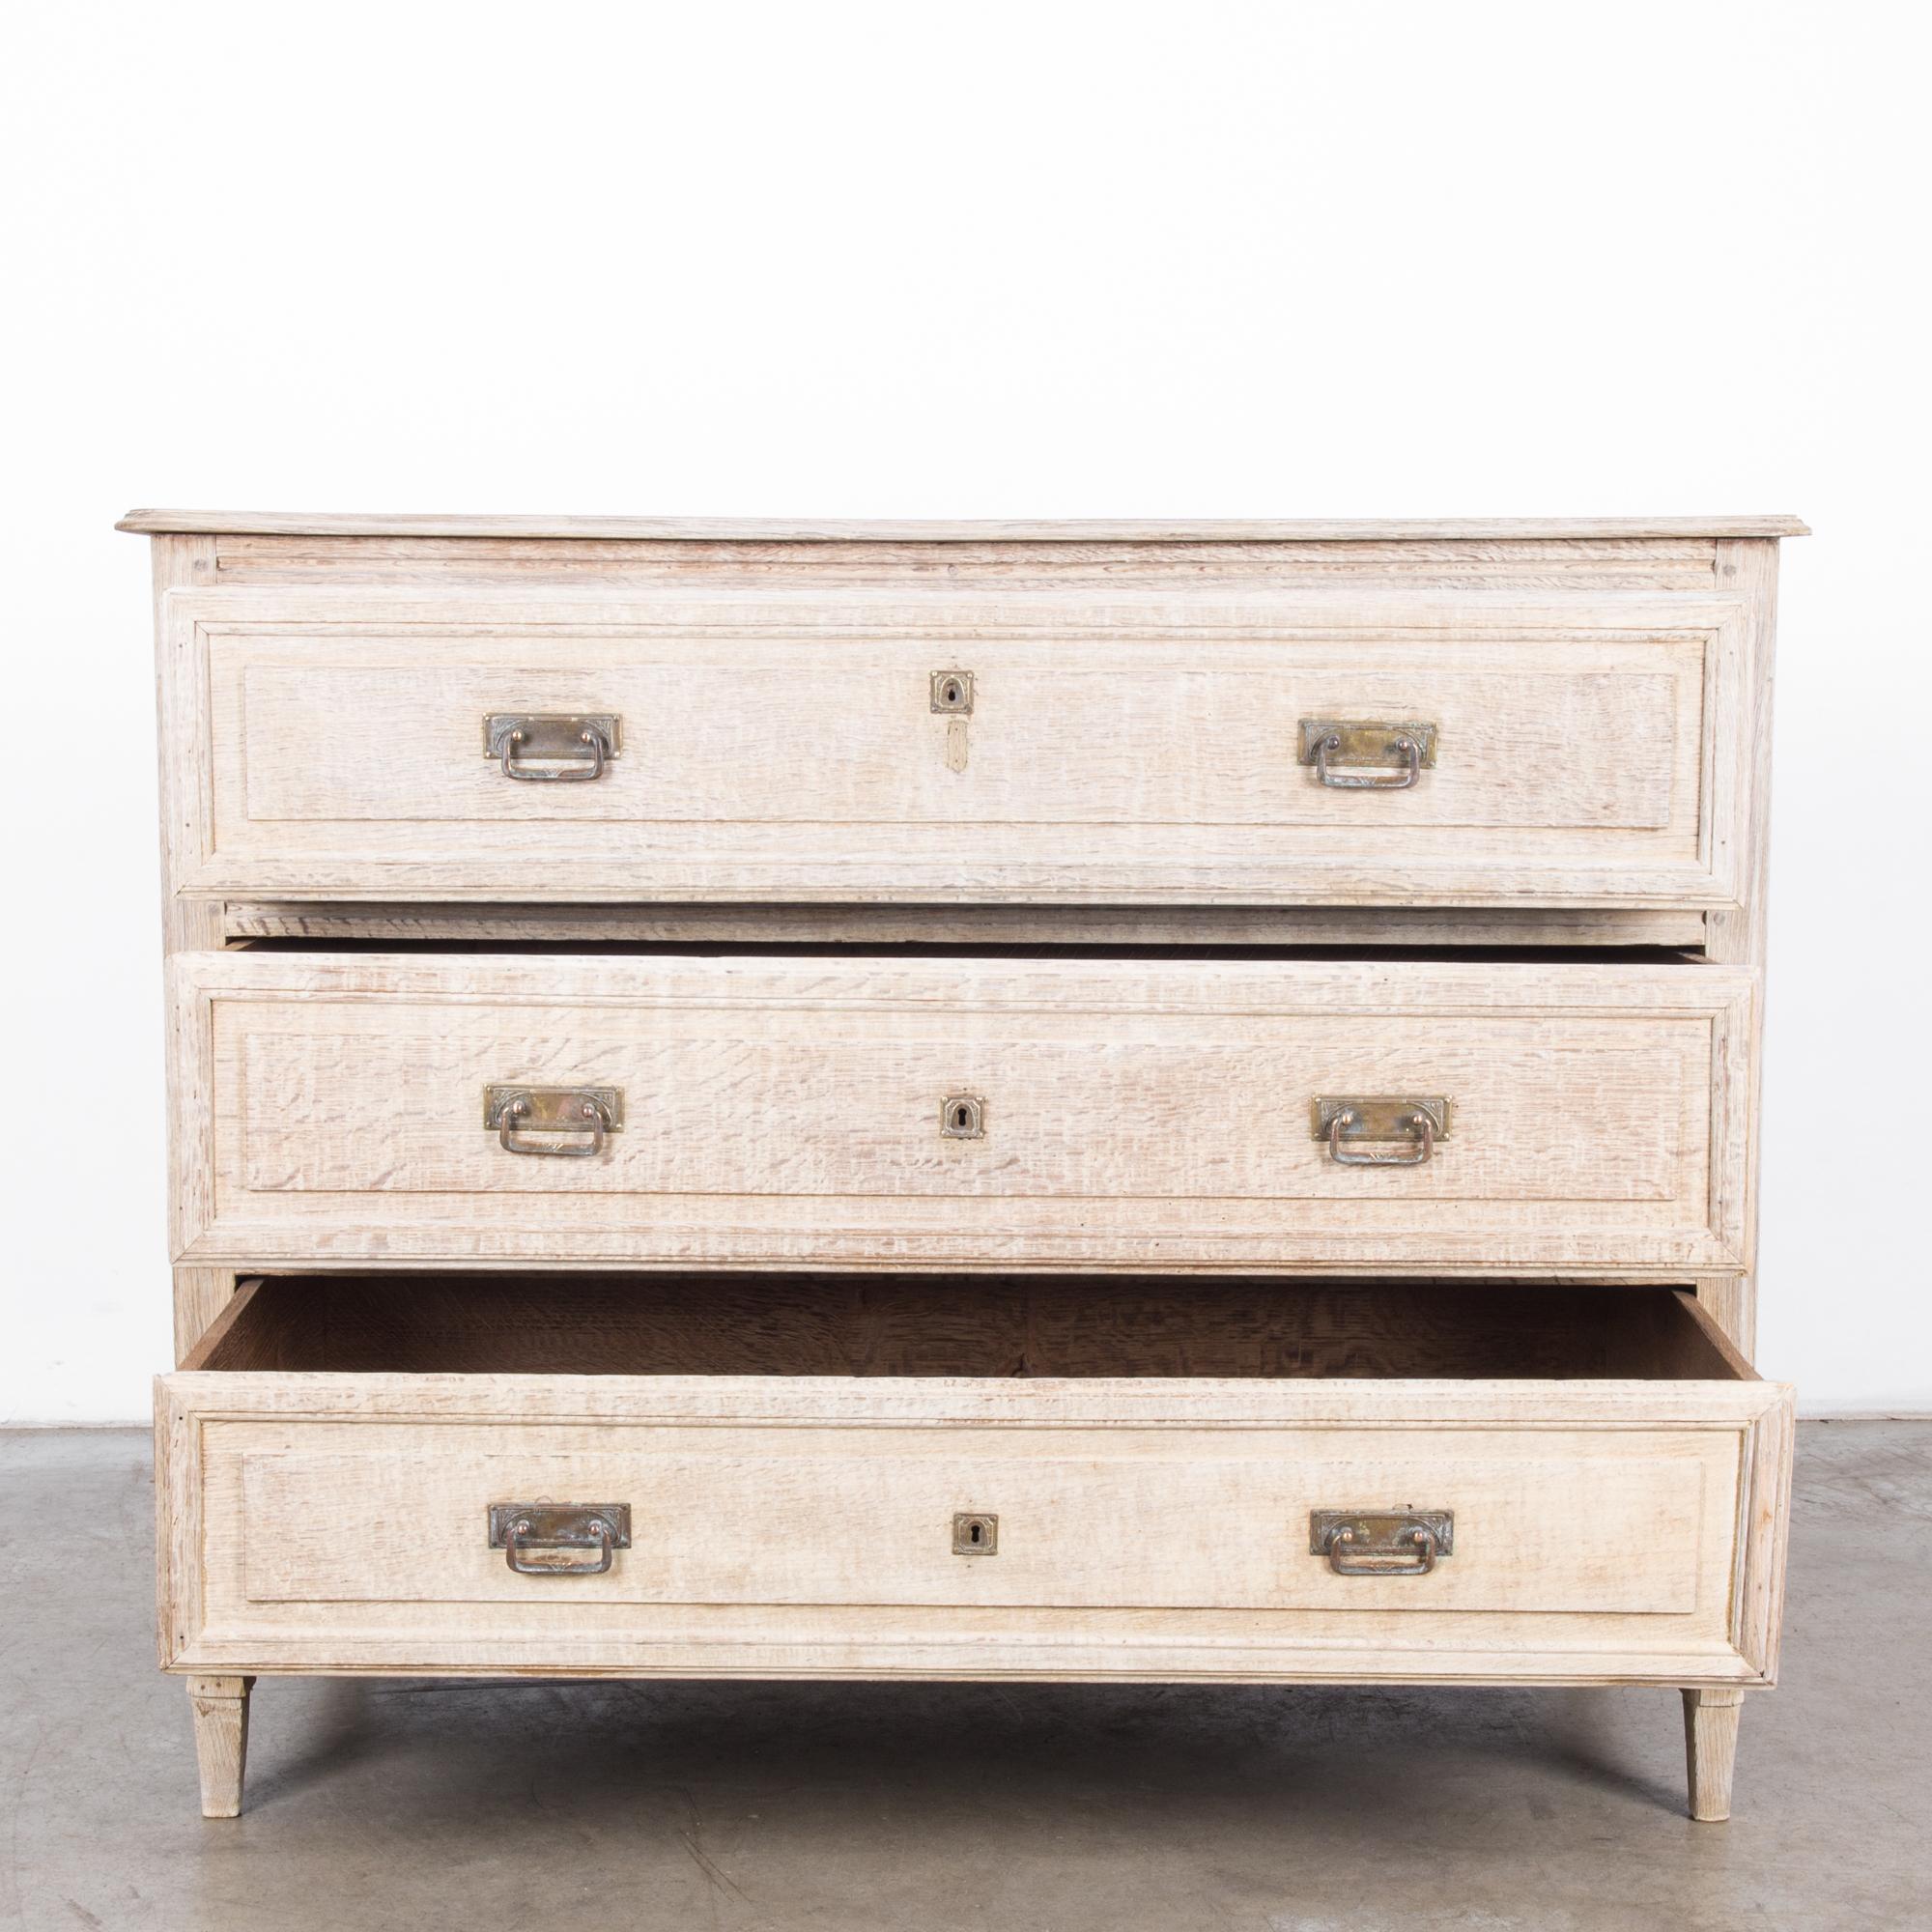 French Provincial Late 19th Century French Bleached Oak Chest of Drawers